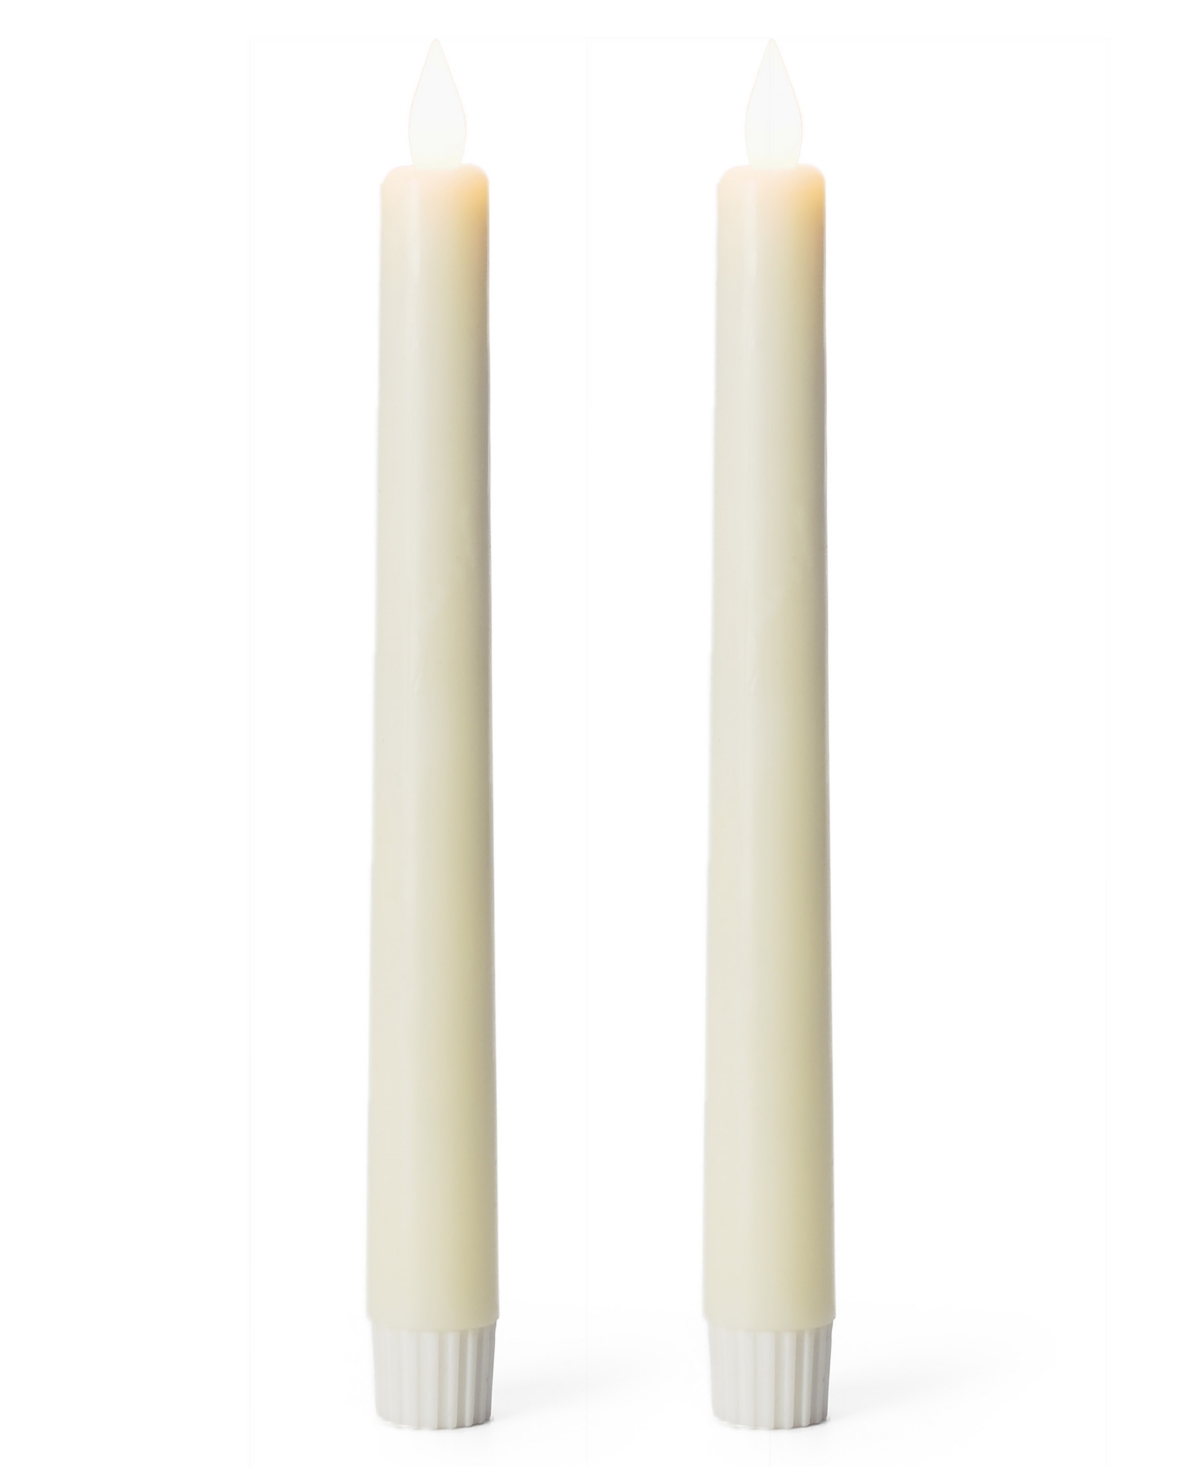 Seasonal Sutton Fluted Motion Flameless Taper Candle 1 X 9.75, Set Of 2 In Ivory